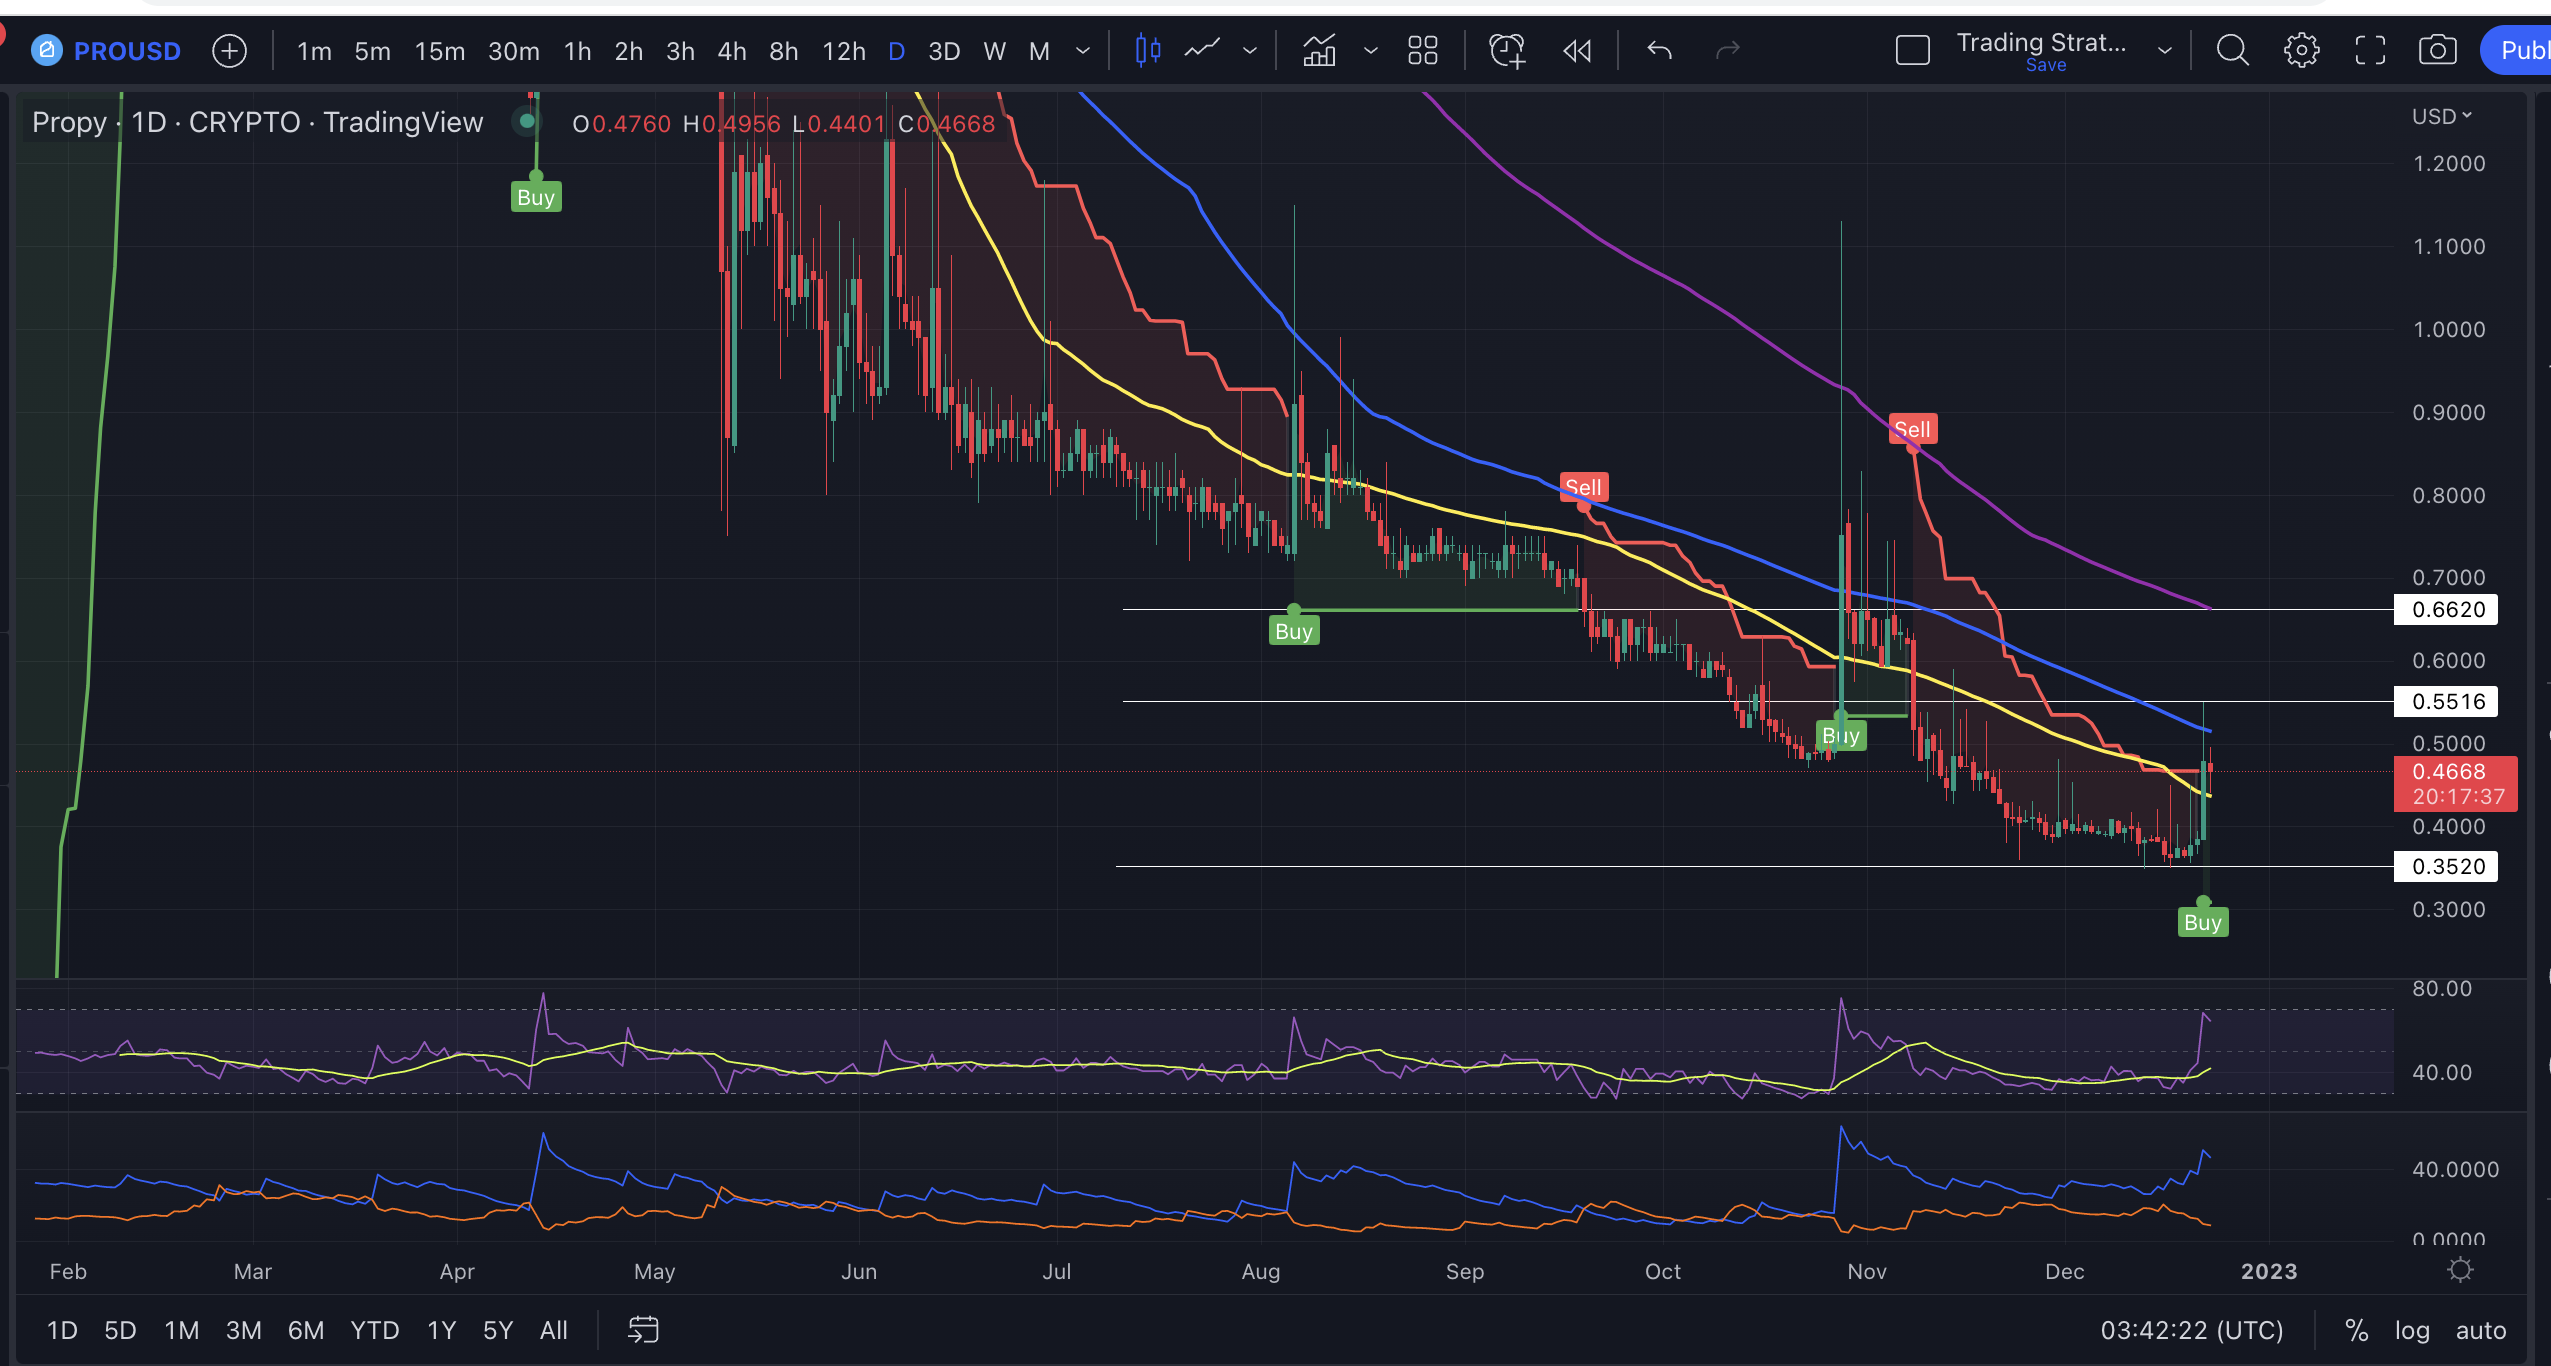 Propy Coin Price Chart